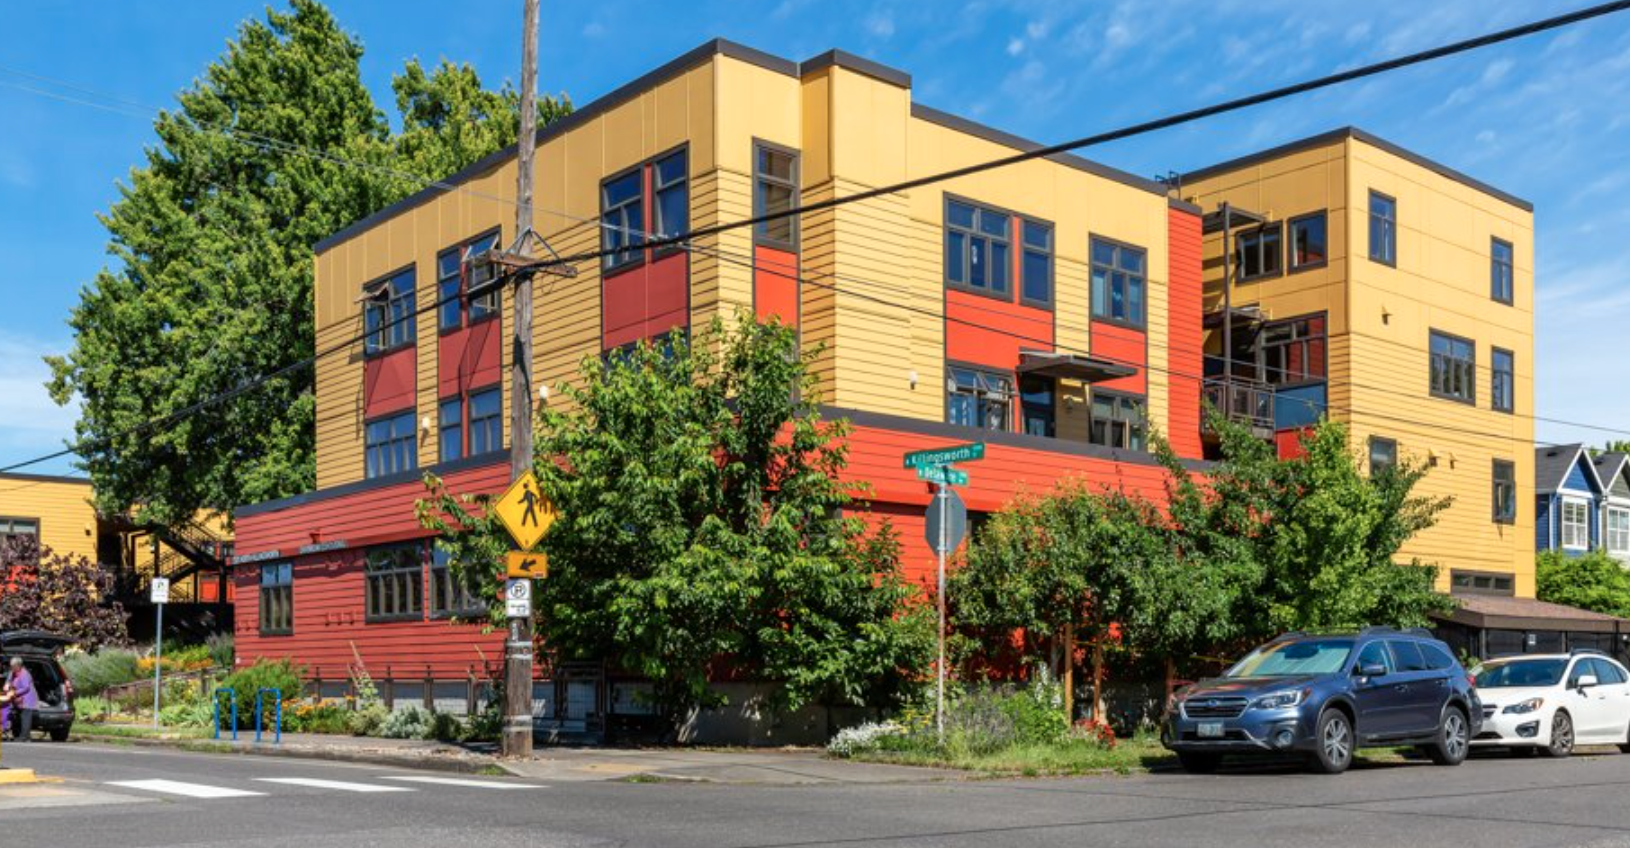 The Ultimate Portland Experience: Co-housing!